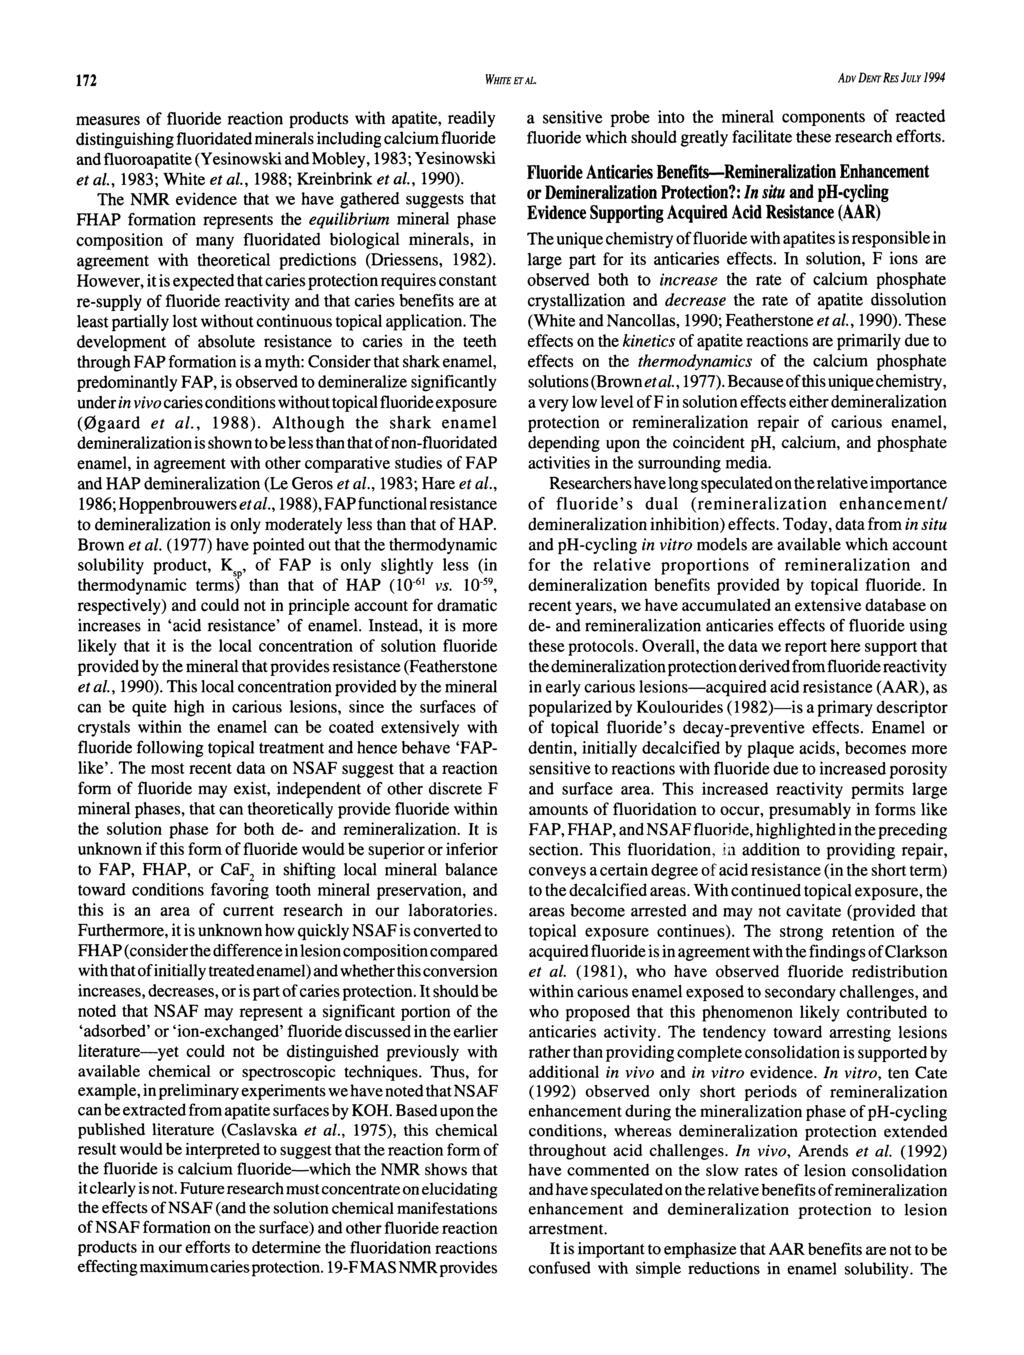 172 WHFIIETAL ADV DEM RES JULY 1994 measures of fluoride reaction products with apatite, readily distinguishing fluoridated minerals including calcium fluoride andfluoroapatite (Yesinowski andmobley,